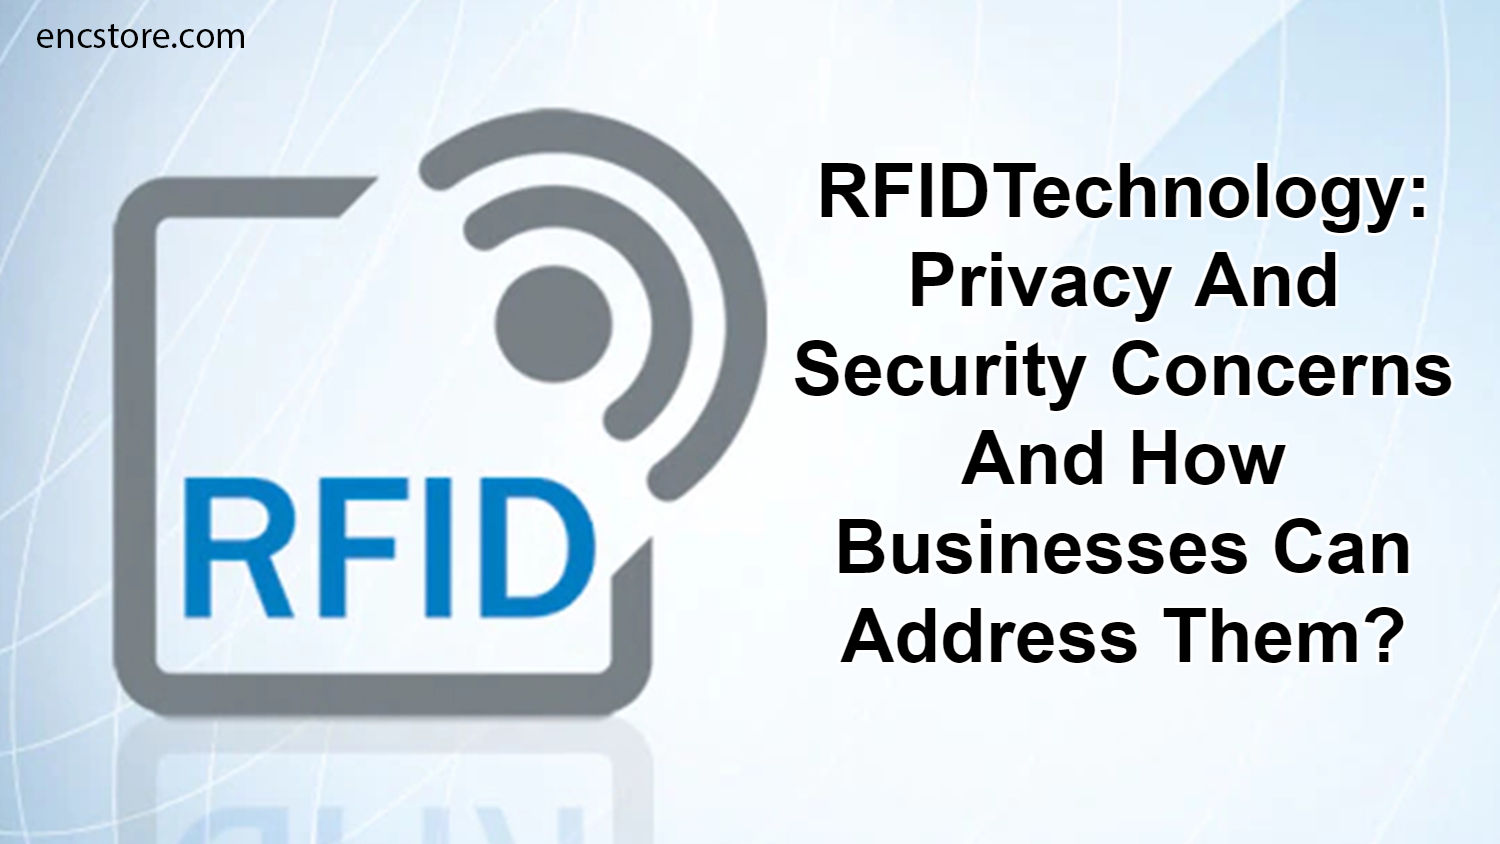 RFID Technology: Privacy and Security Concerns